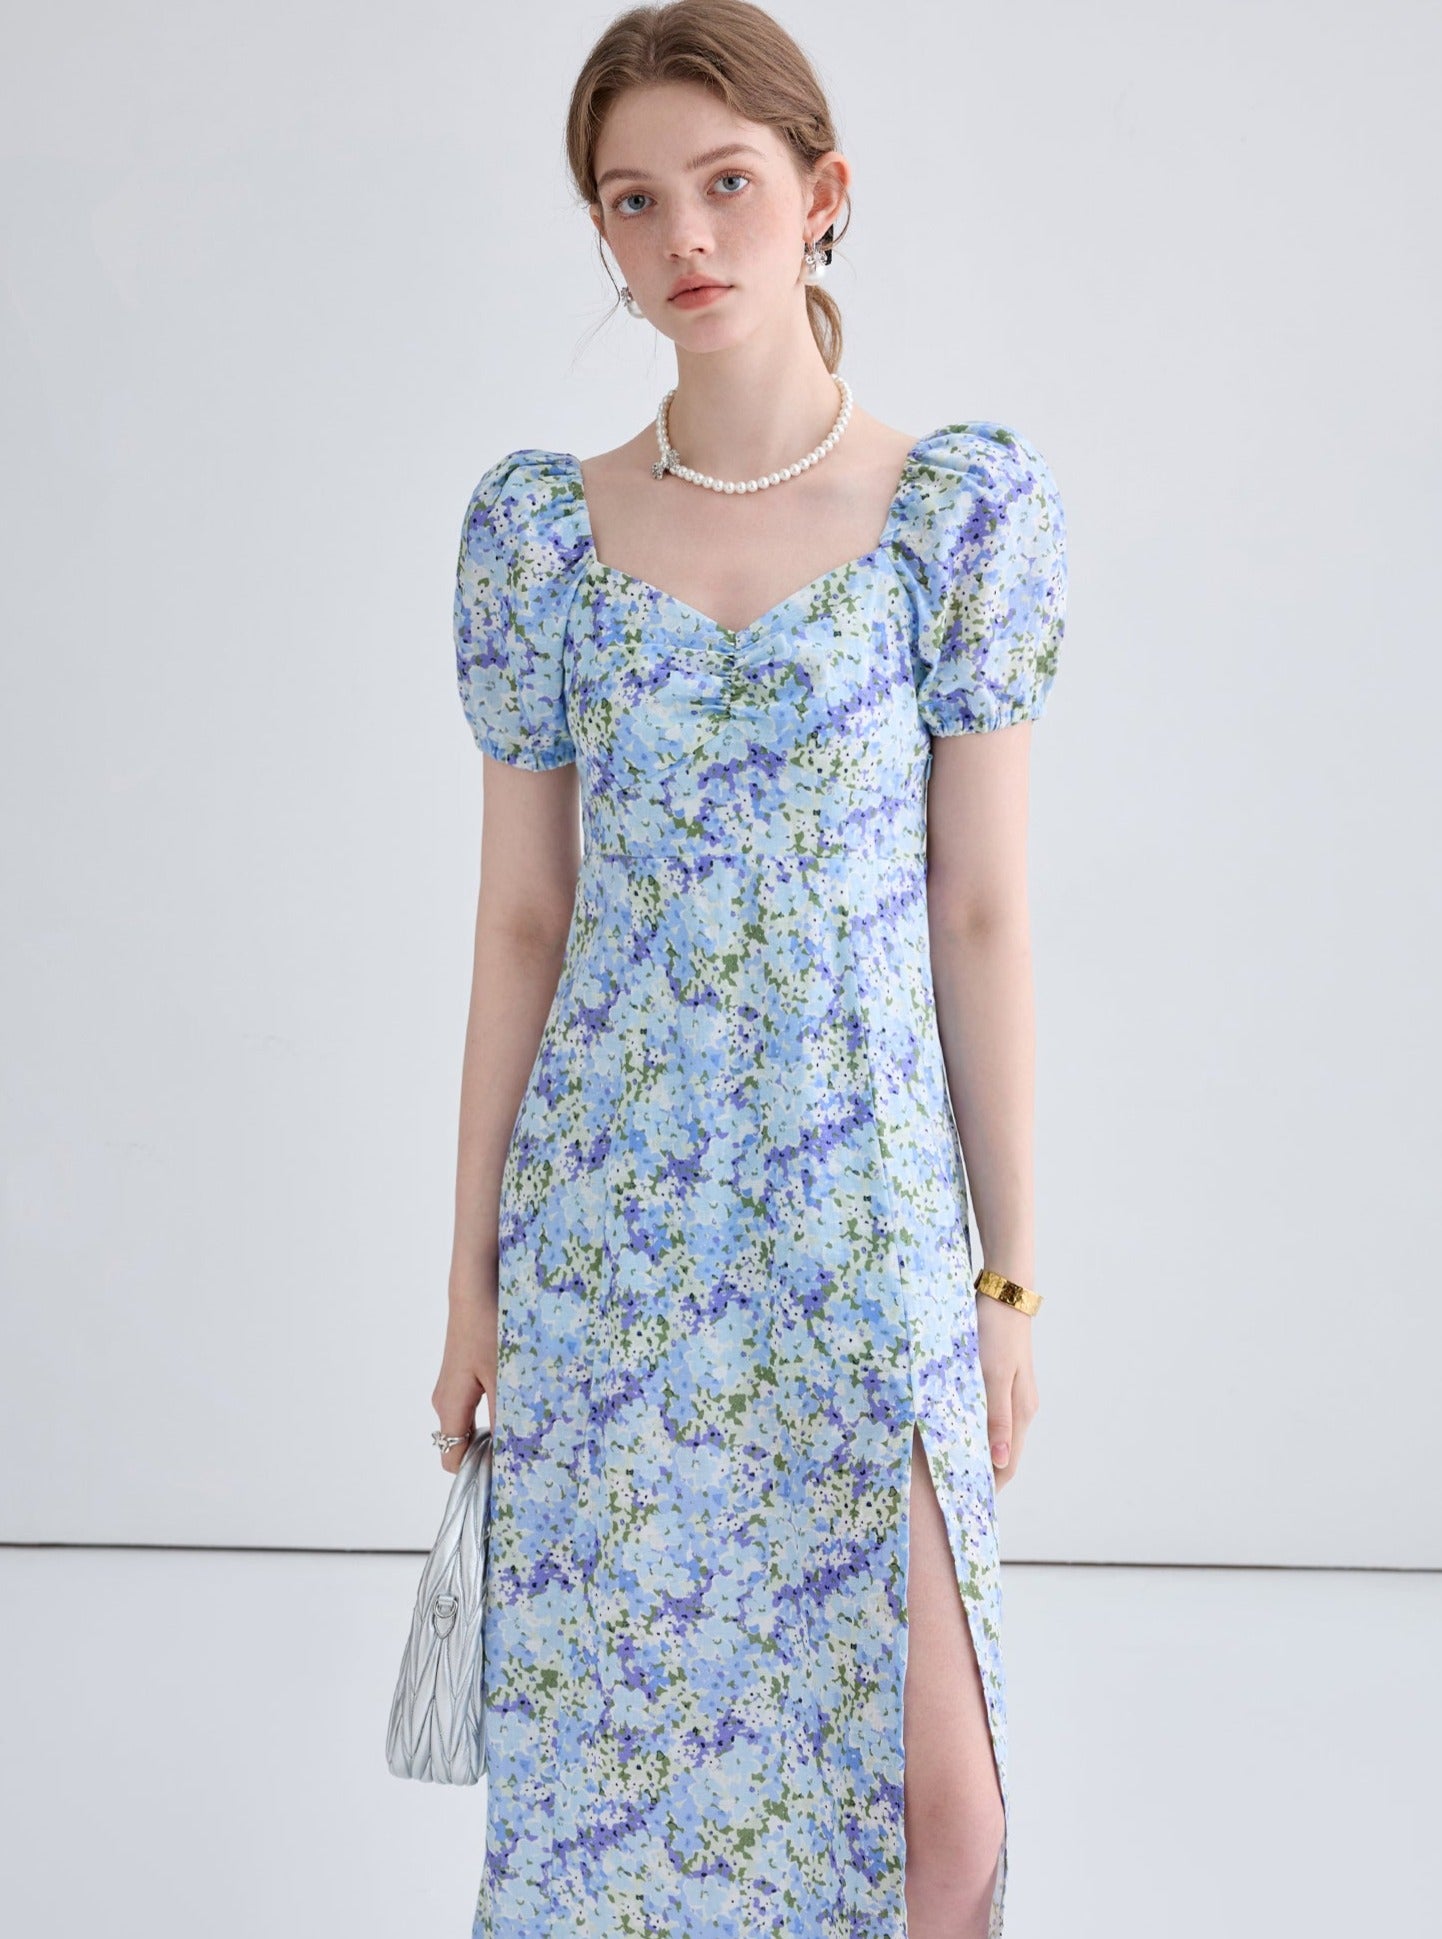 French Retro Floral Dress